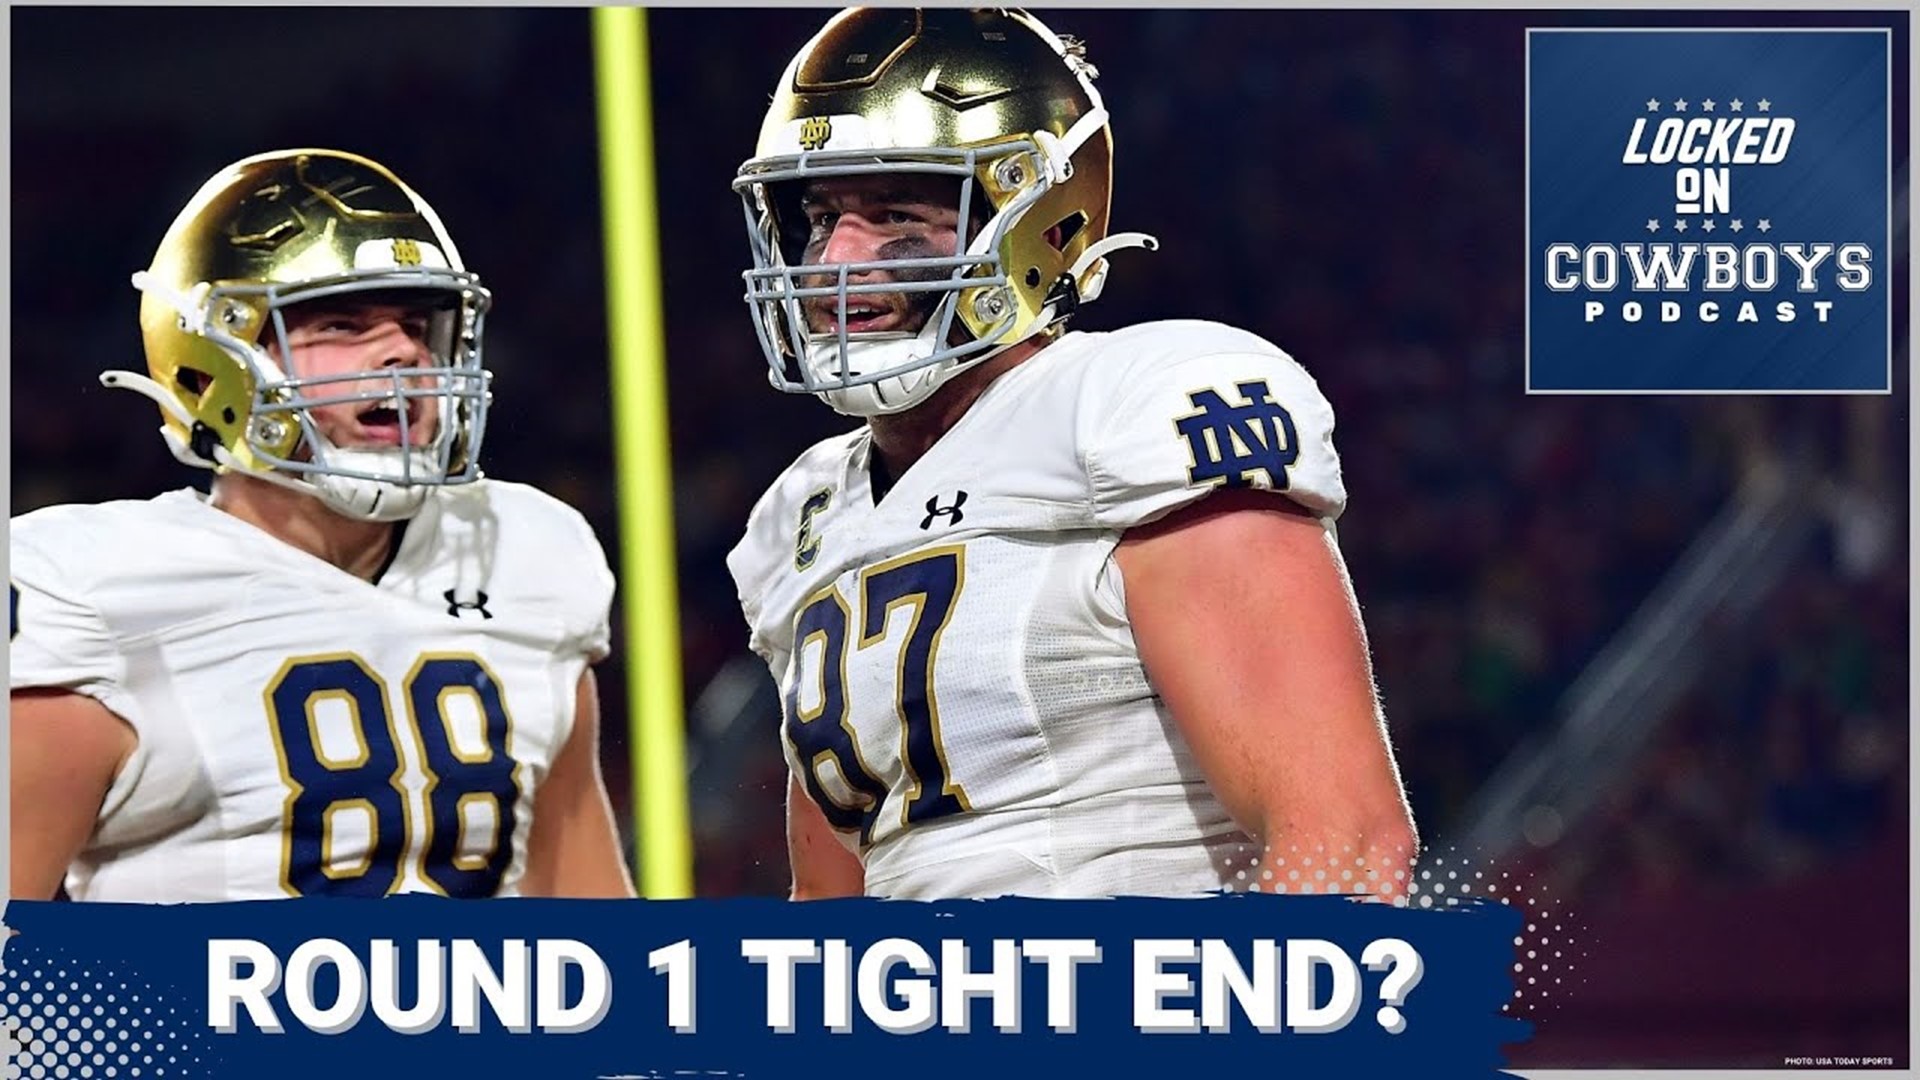 Marcus Mosher and Landon McCool discuss three tight end prospects -- Michael Mayer, Darnell Washington and Dalton Kincaid -- that the Cowboys could draft in Round 1.